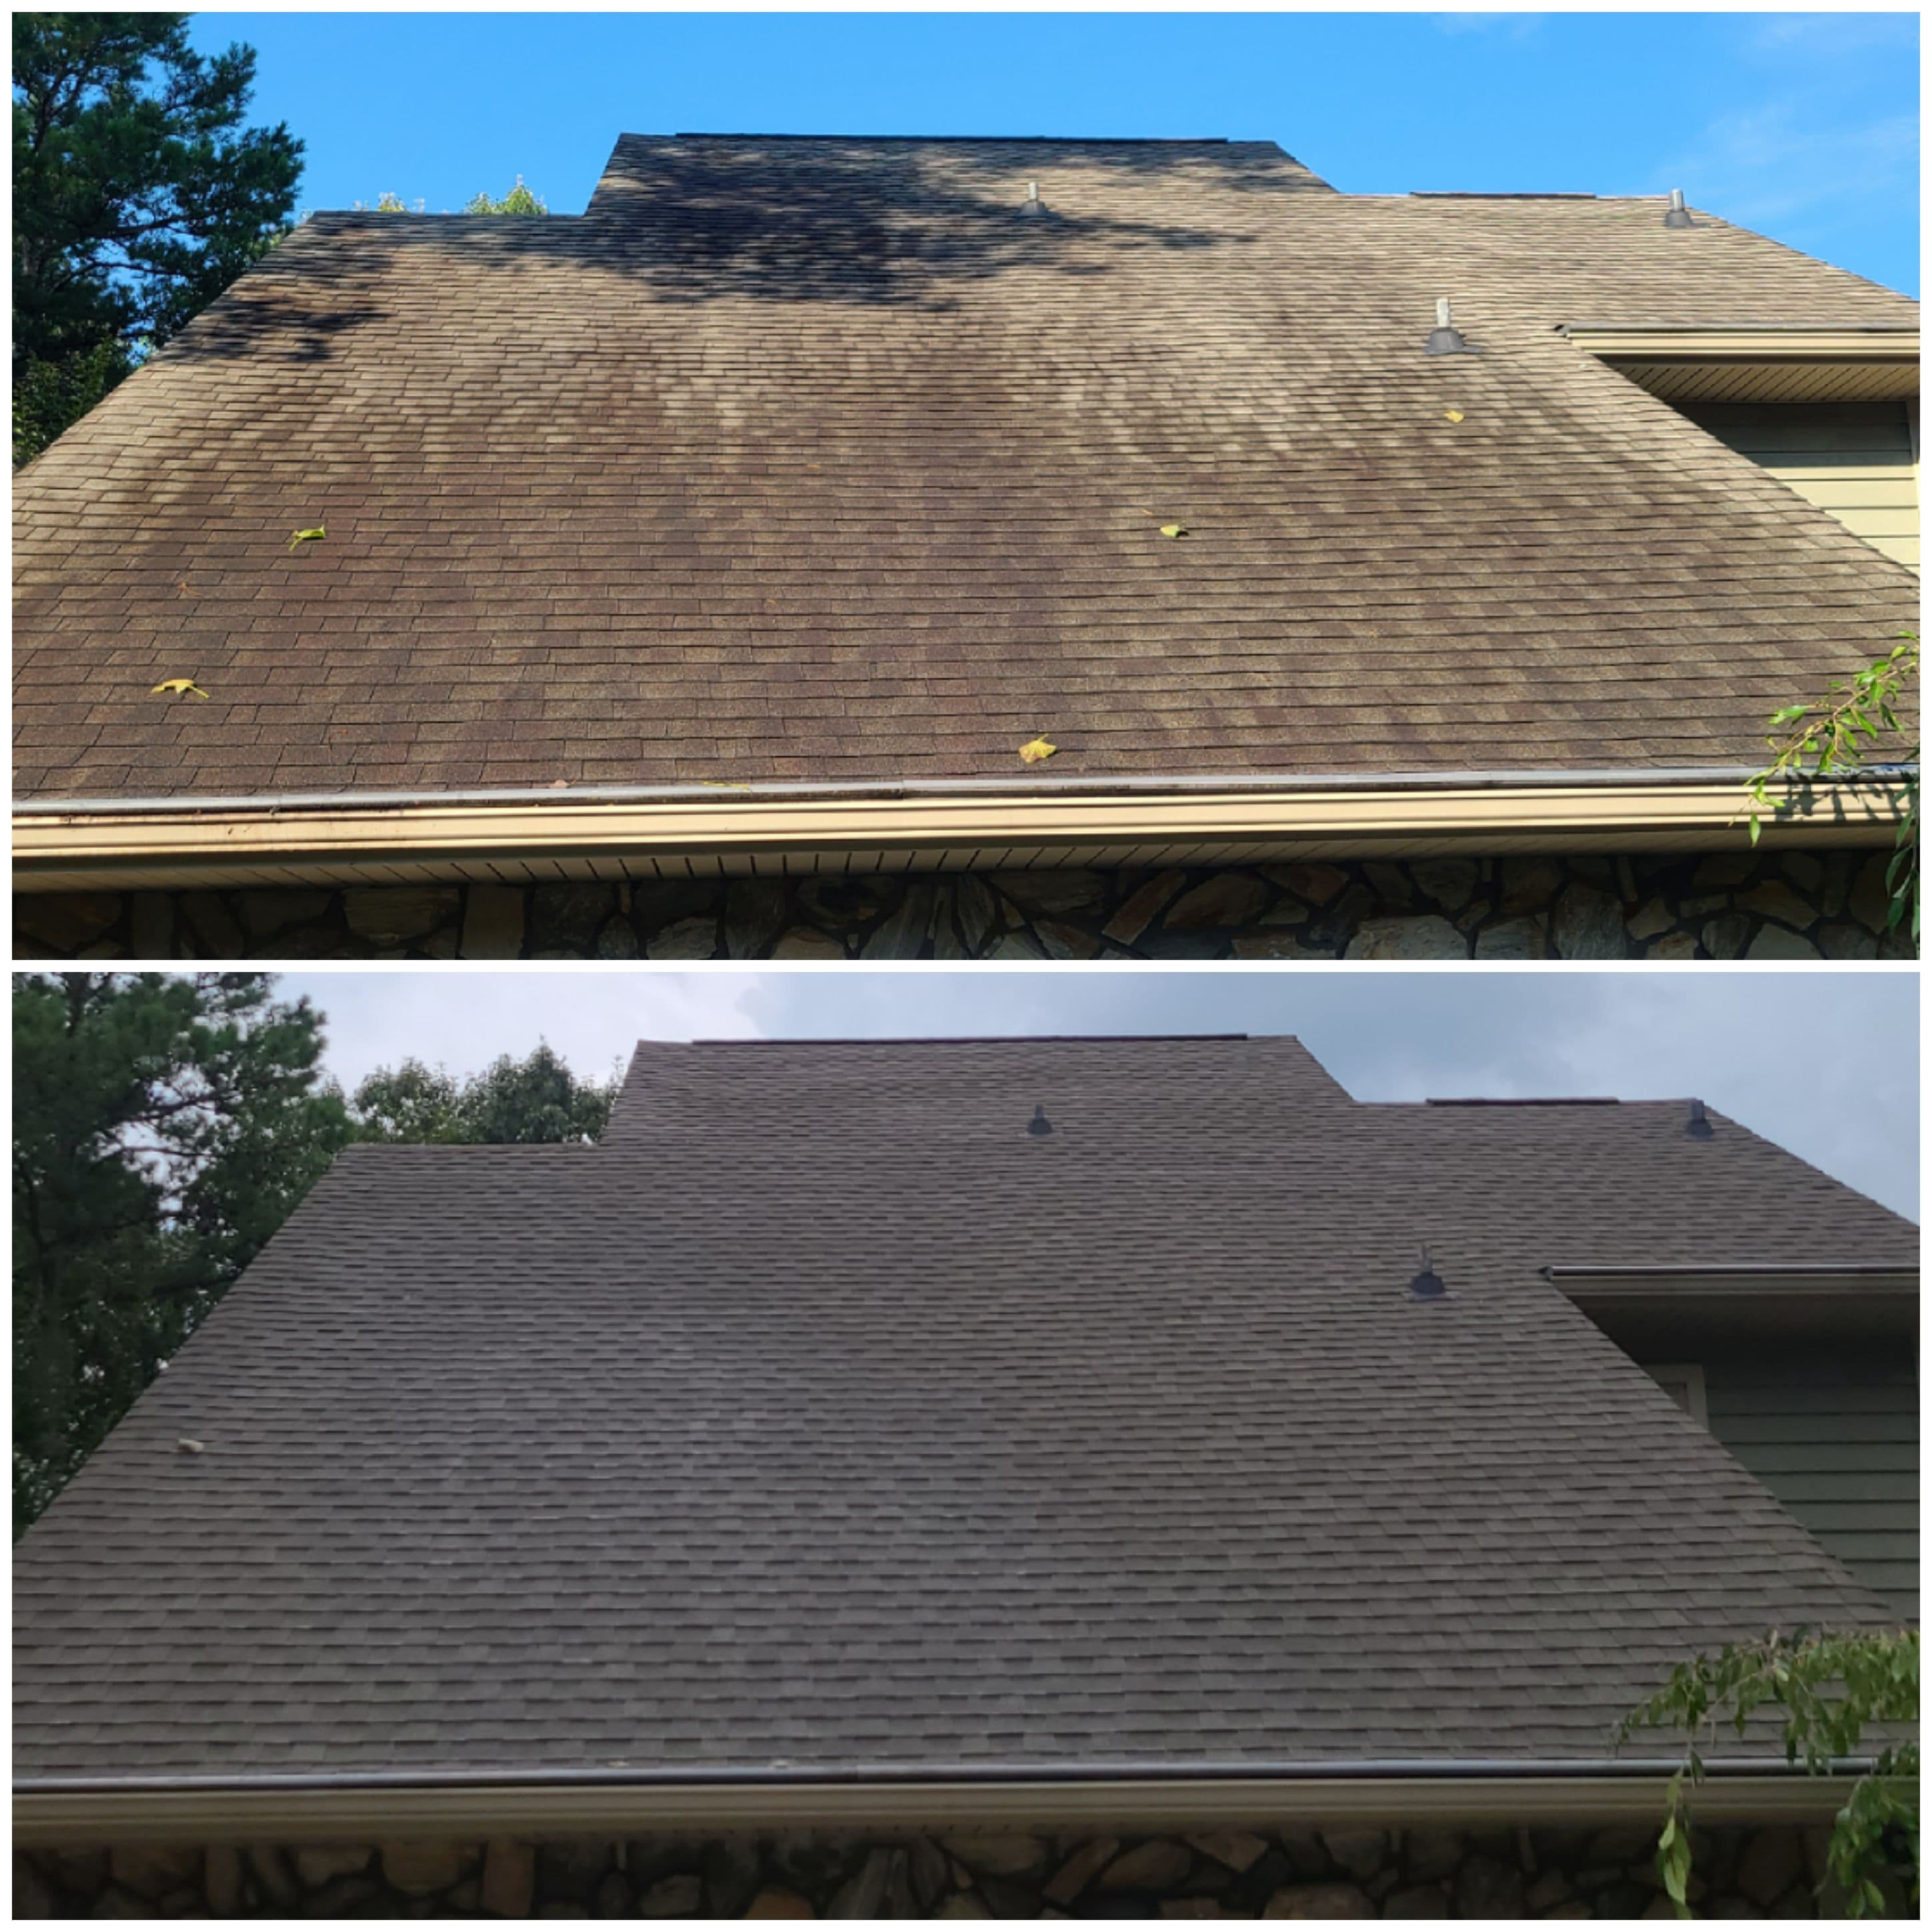 Roof cleaning molokai dr charlotte nc